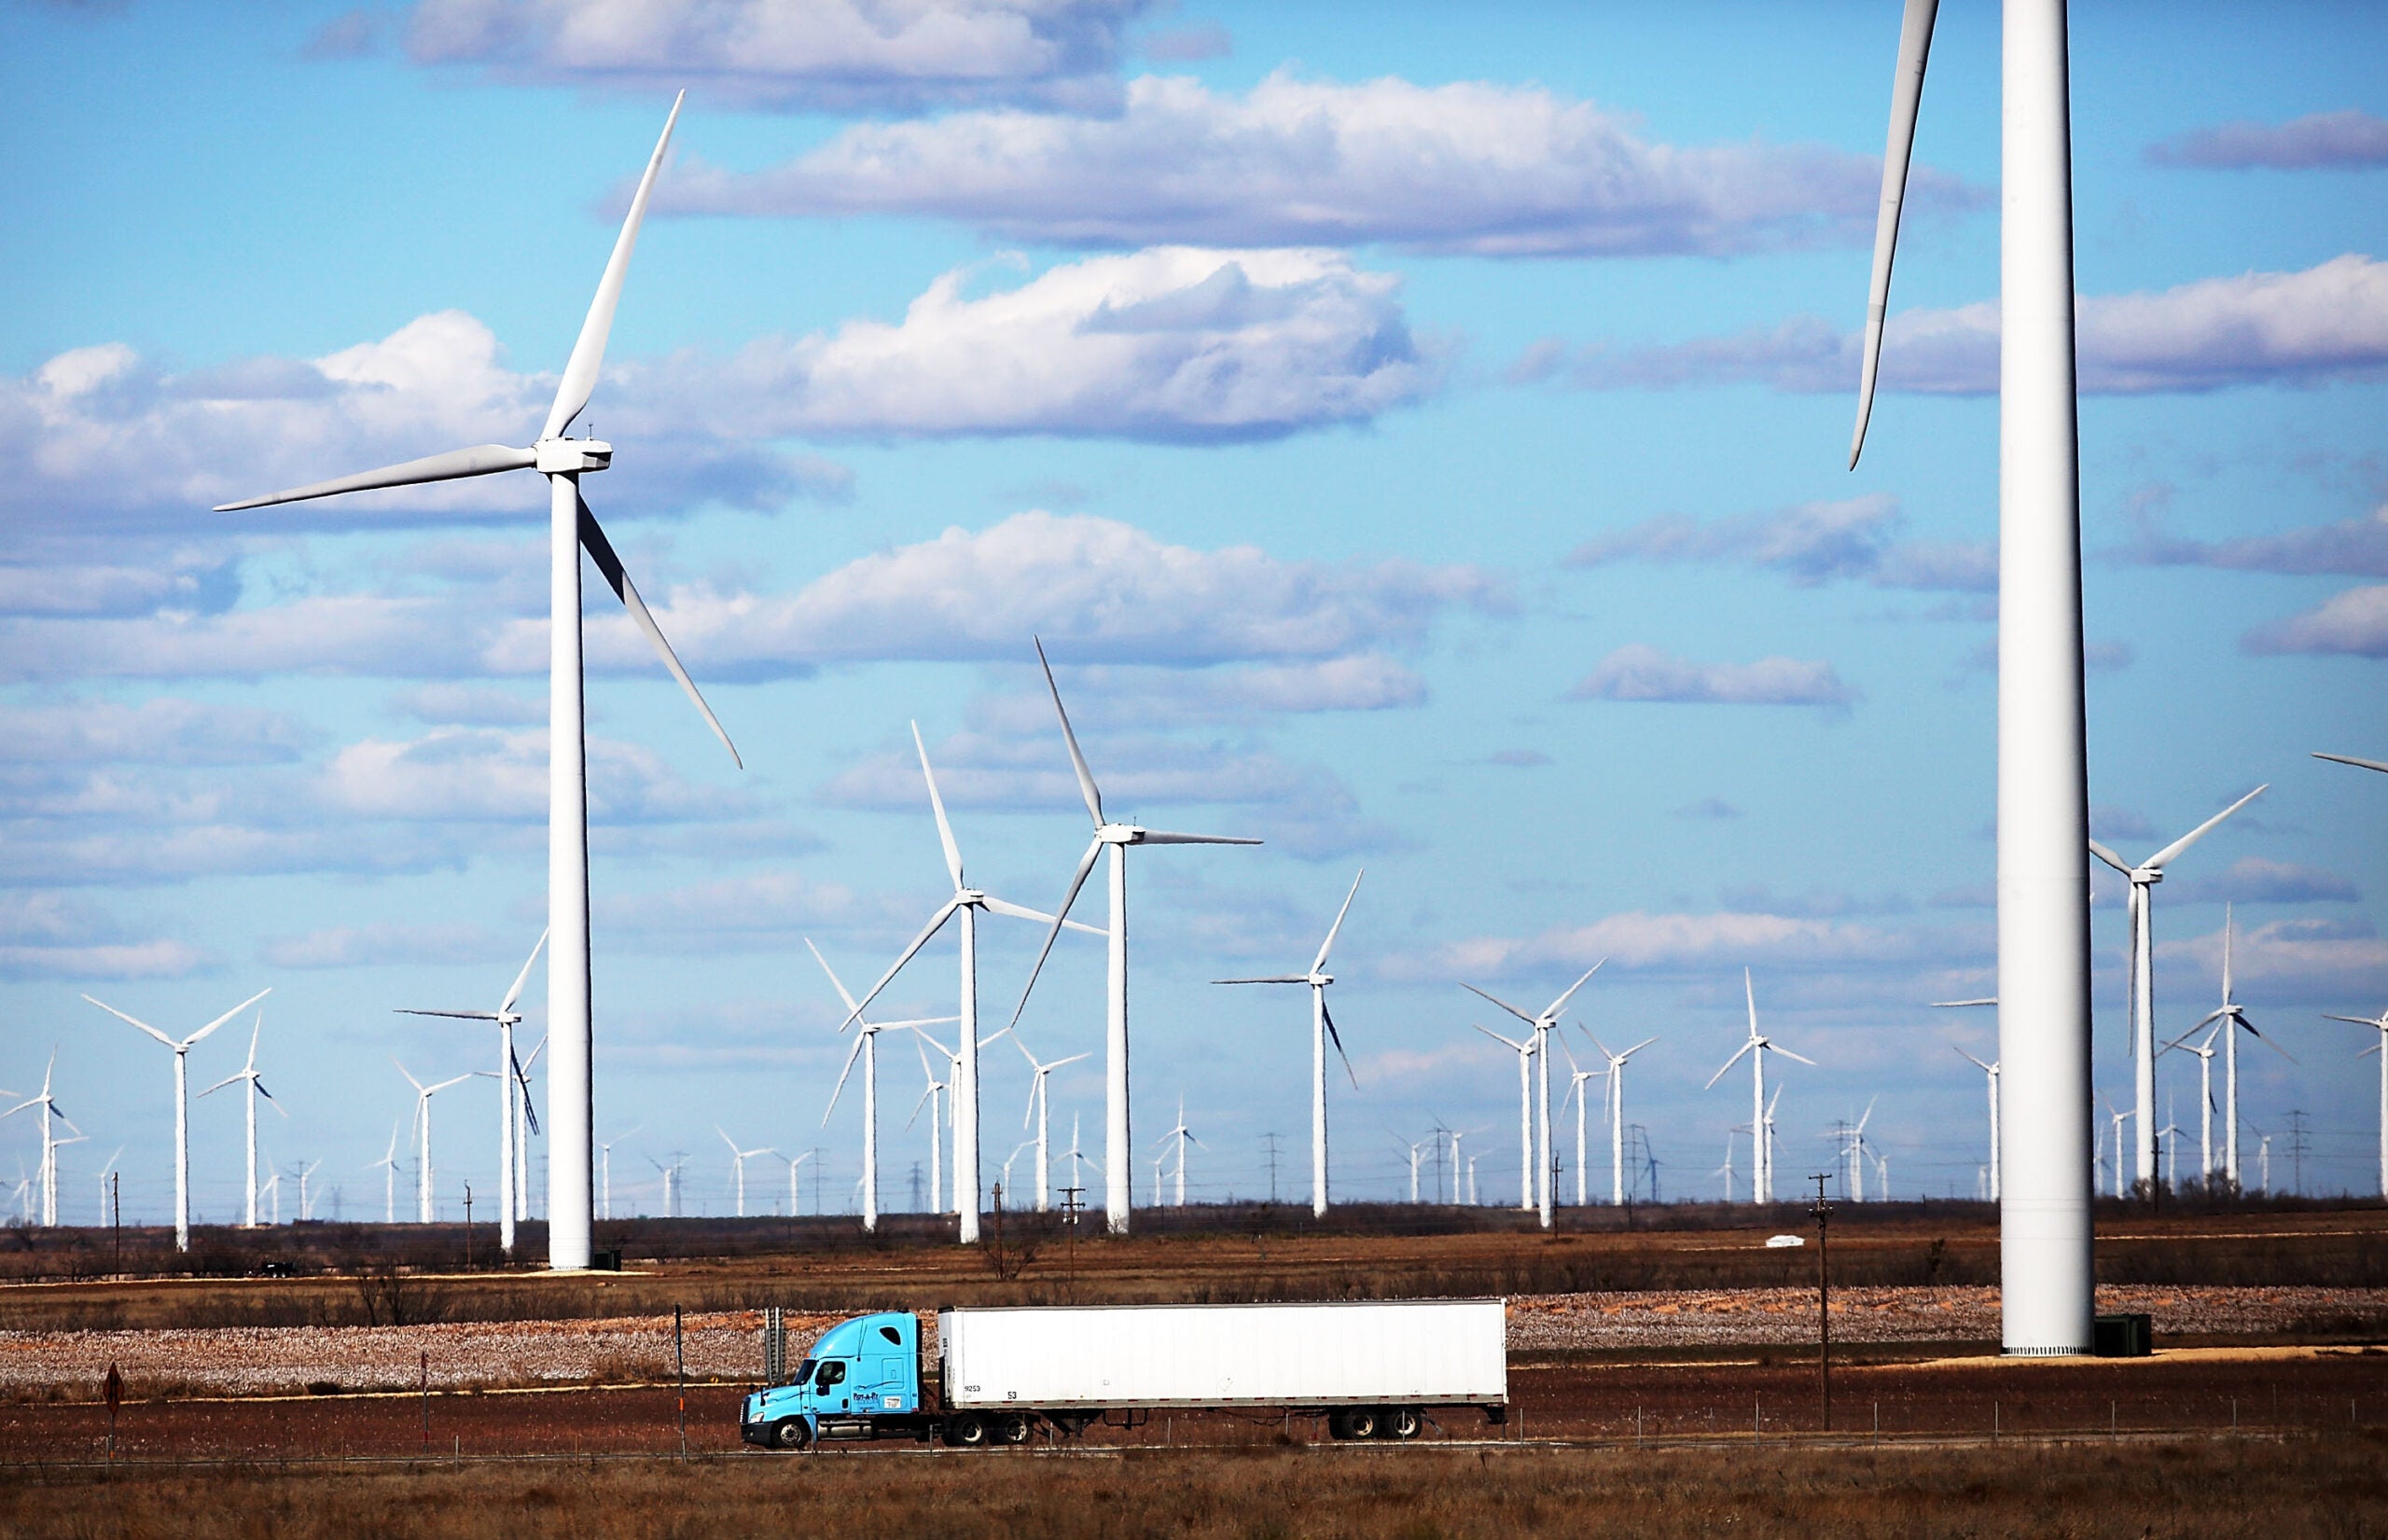 America’s red states lead wind and solar power surge